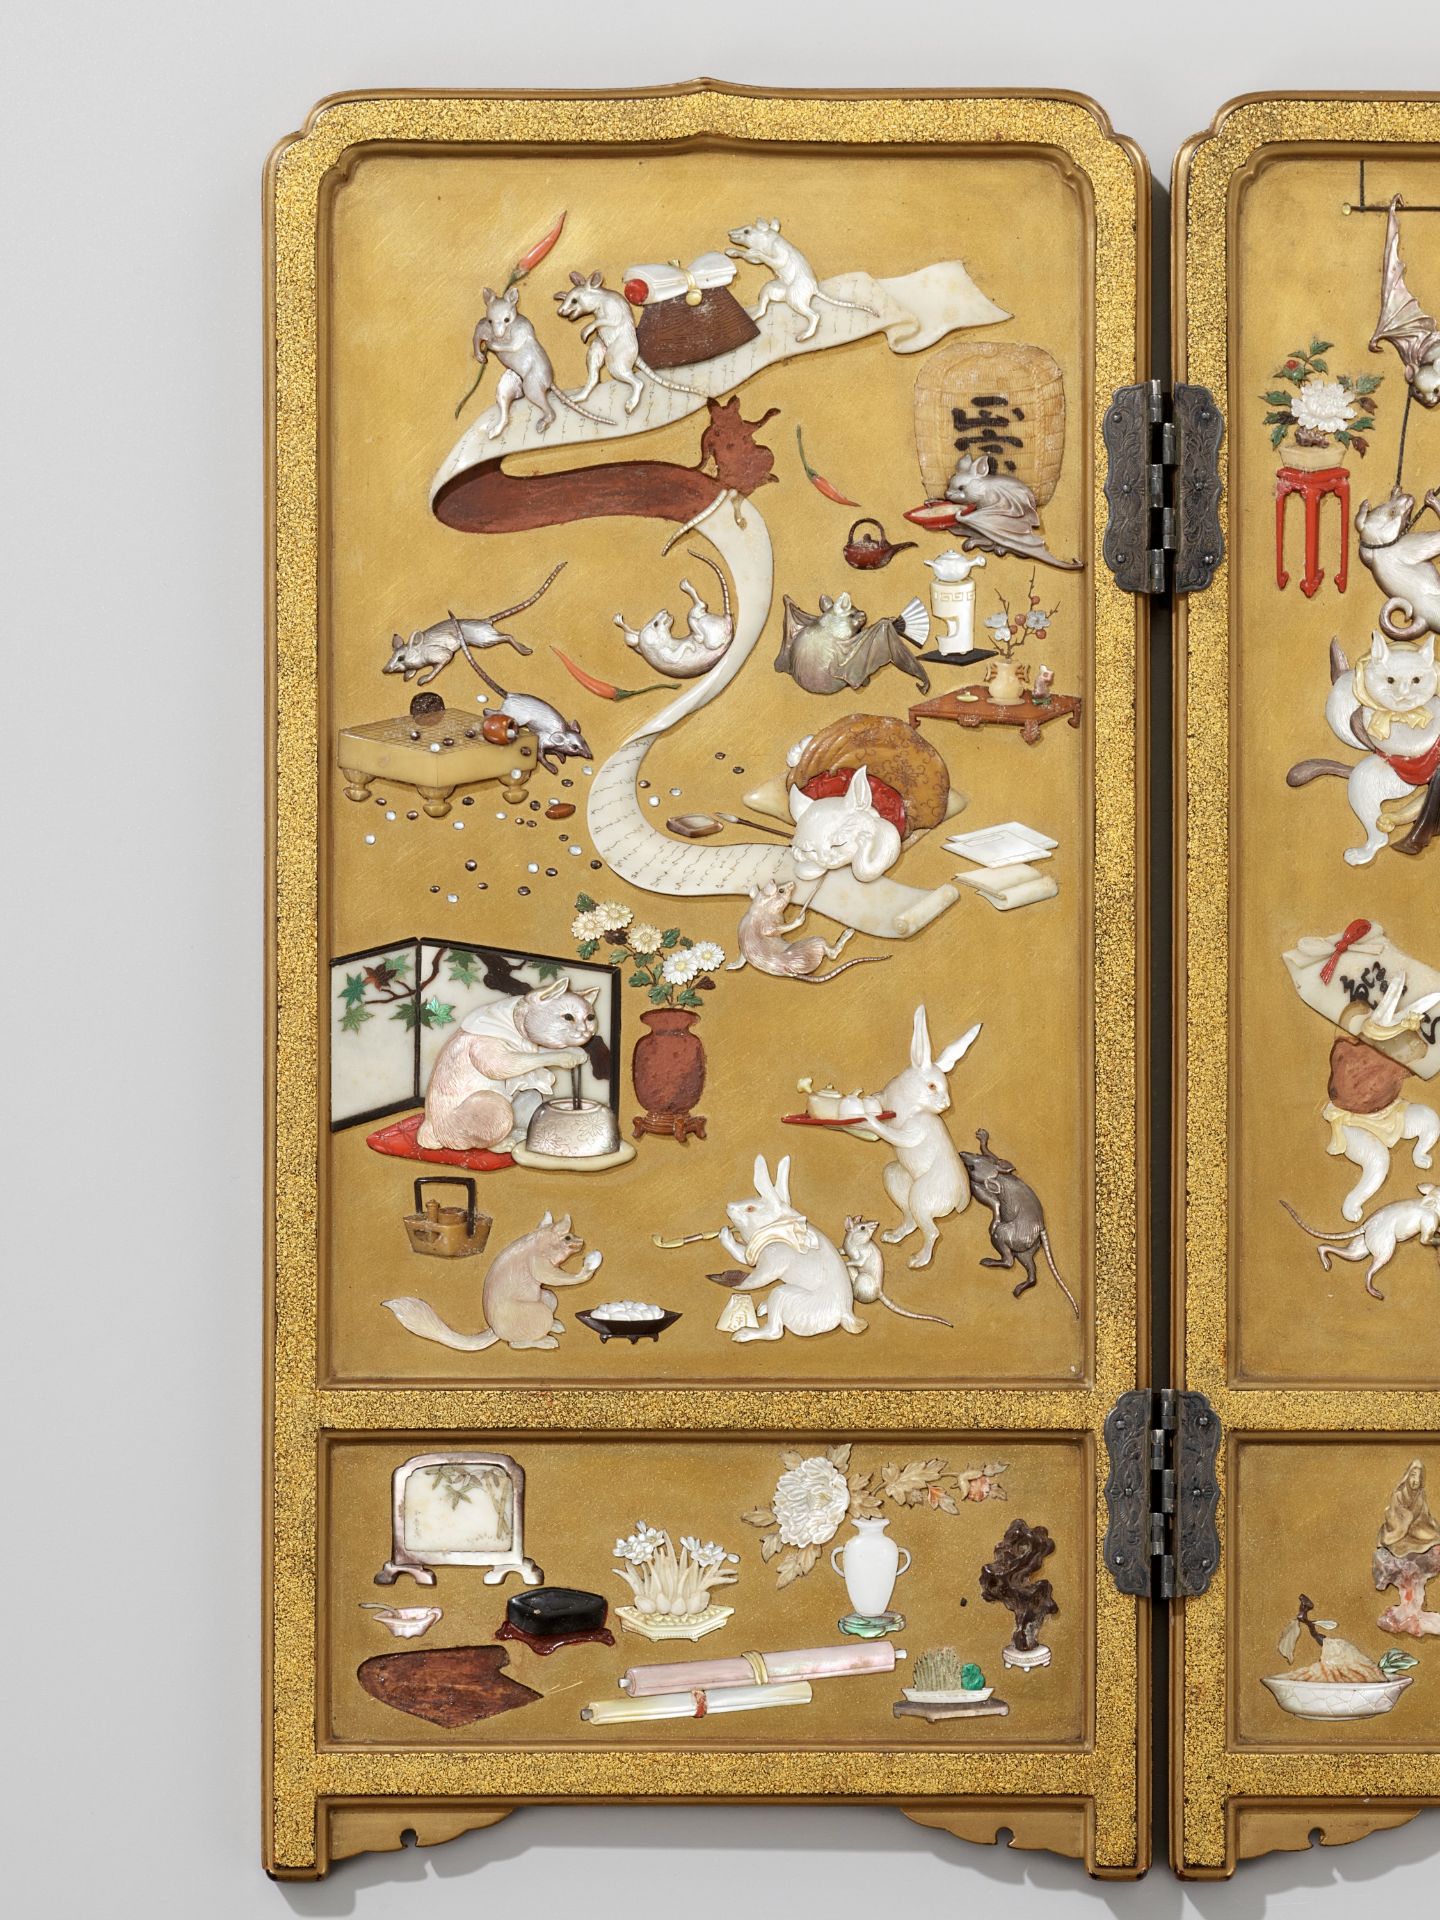 A RARE AND SUPERB SHIBAYAMA-STYLE INLAID GOLD LACQUER TABLE SCREEN WITH KYOSAI'S ANIMAL CIRCUS - Bild 7 aus 11